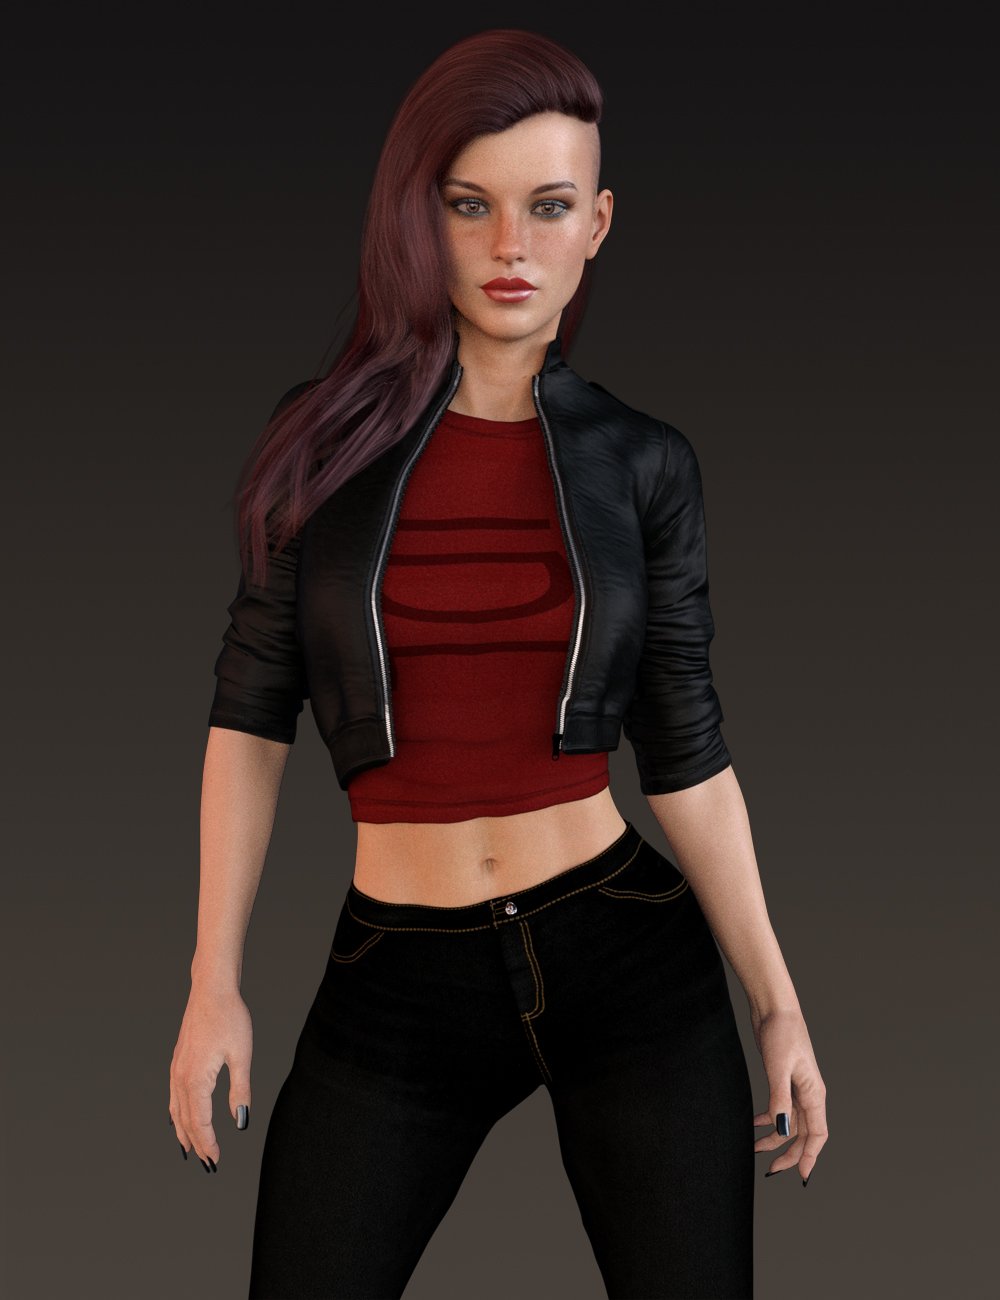 Leather Outfit For Genesis Female